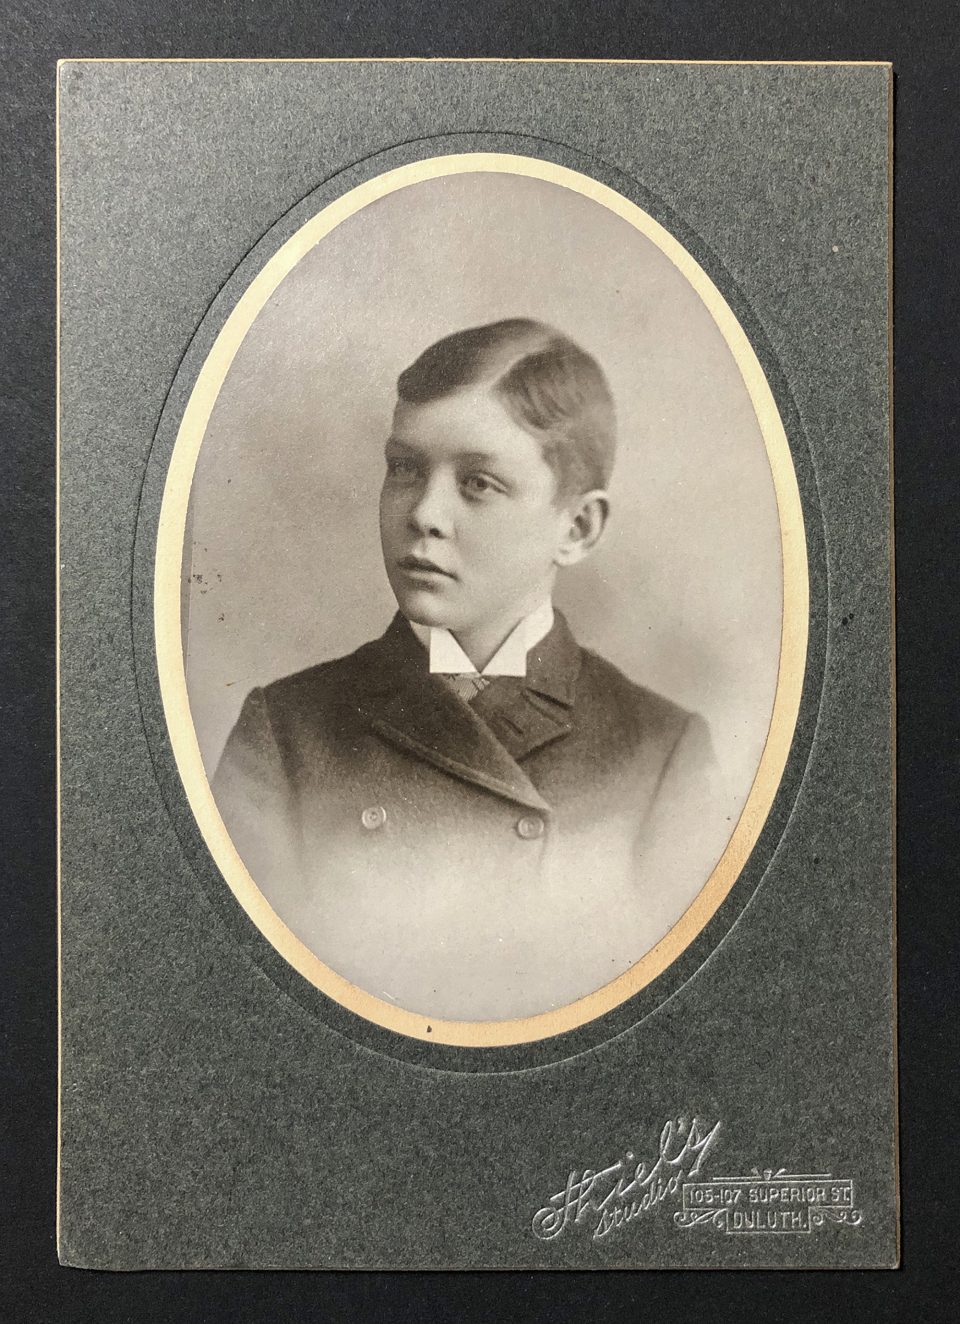 A head and shoulders portrait of a boy in a buttoned-up overcoat with an oval window mat by Theil’s Studio branding. The studio address was 105-107 Superior Street in Duluth, which places the date of this photo between 1891 and 1901.